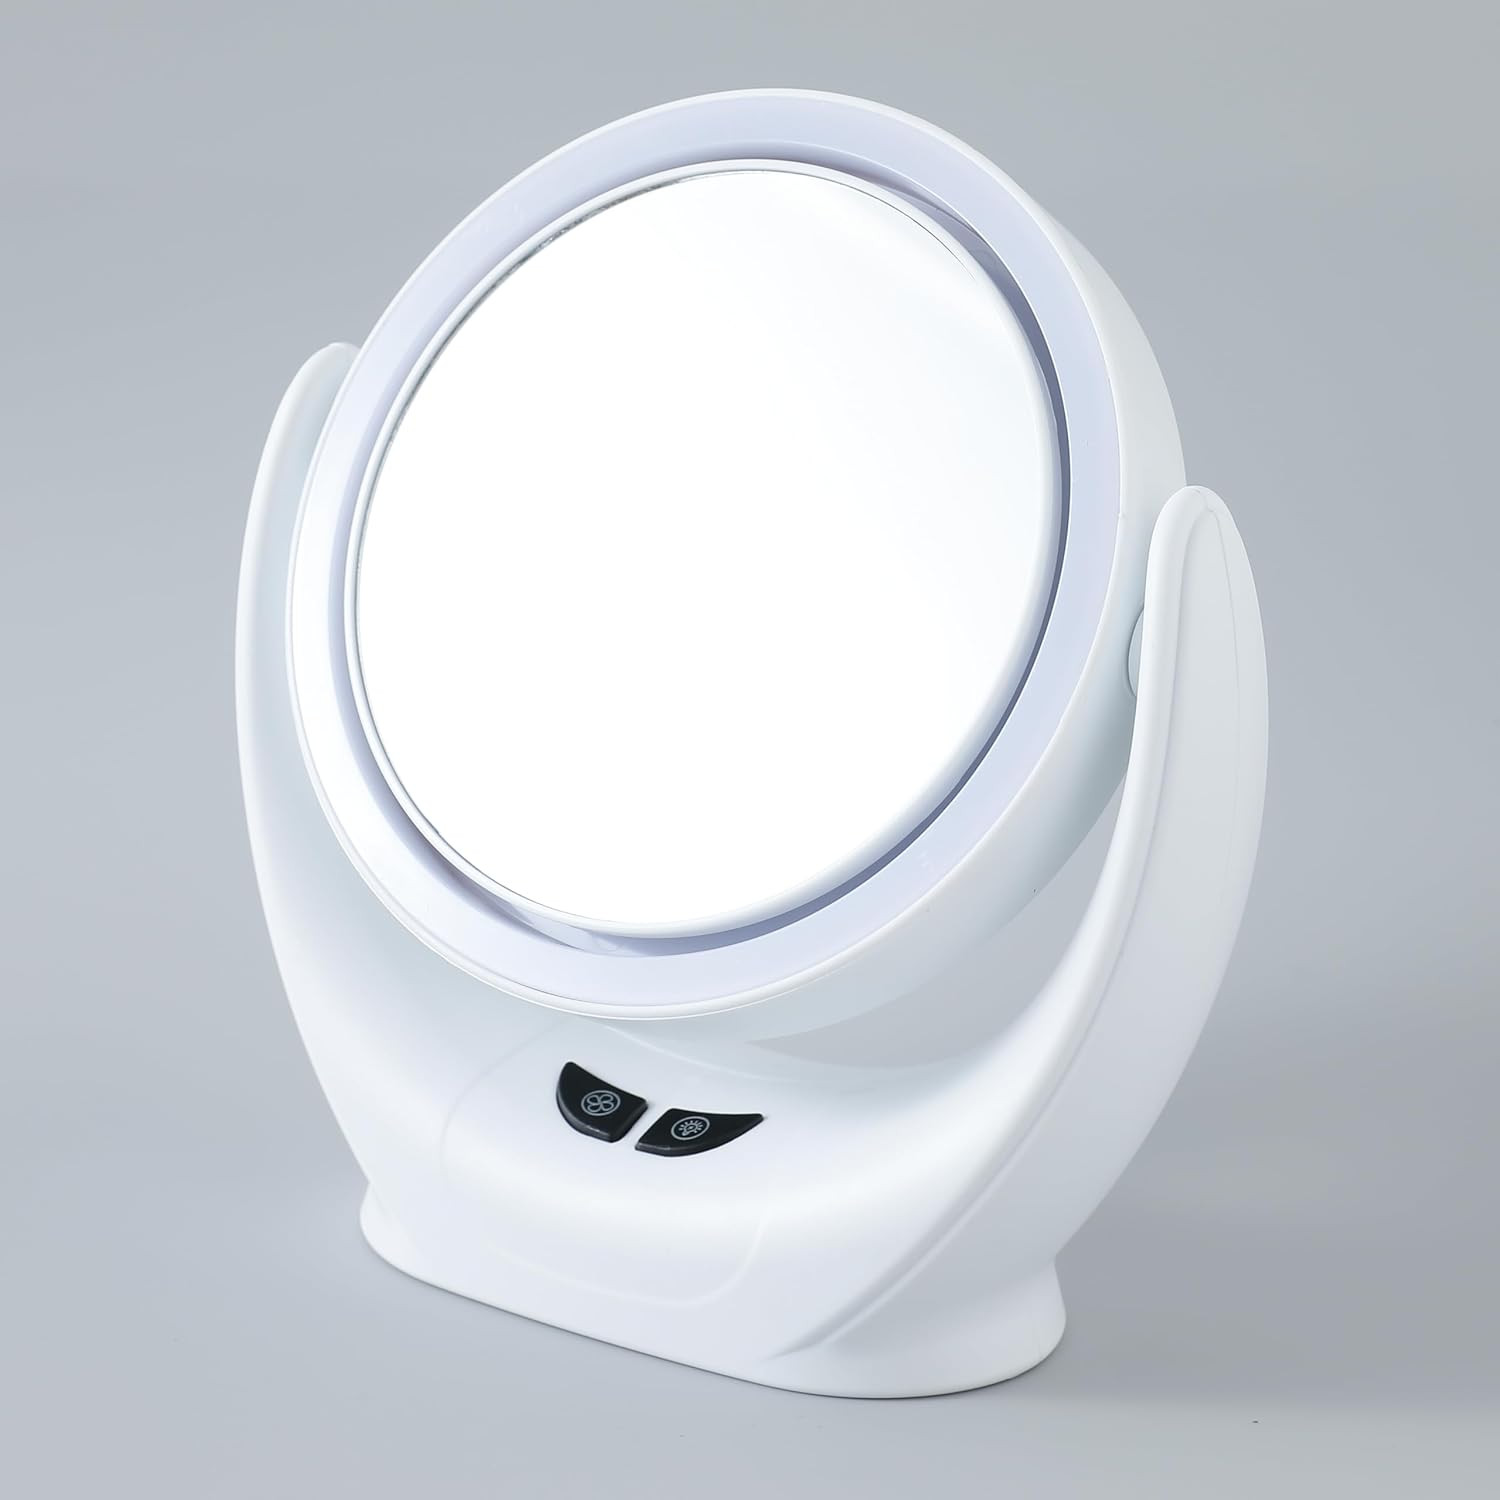 Kuber Industires Small Makeup Mirror With LED Light|Mirror For Table Top, Vanity, Desk|Battery Operated With USB Port(White)